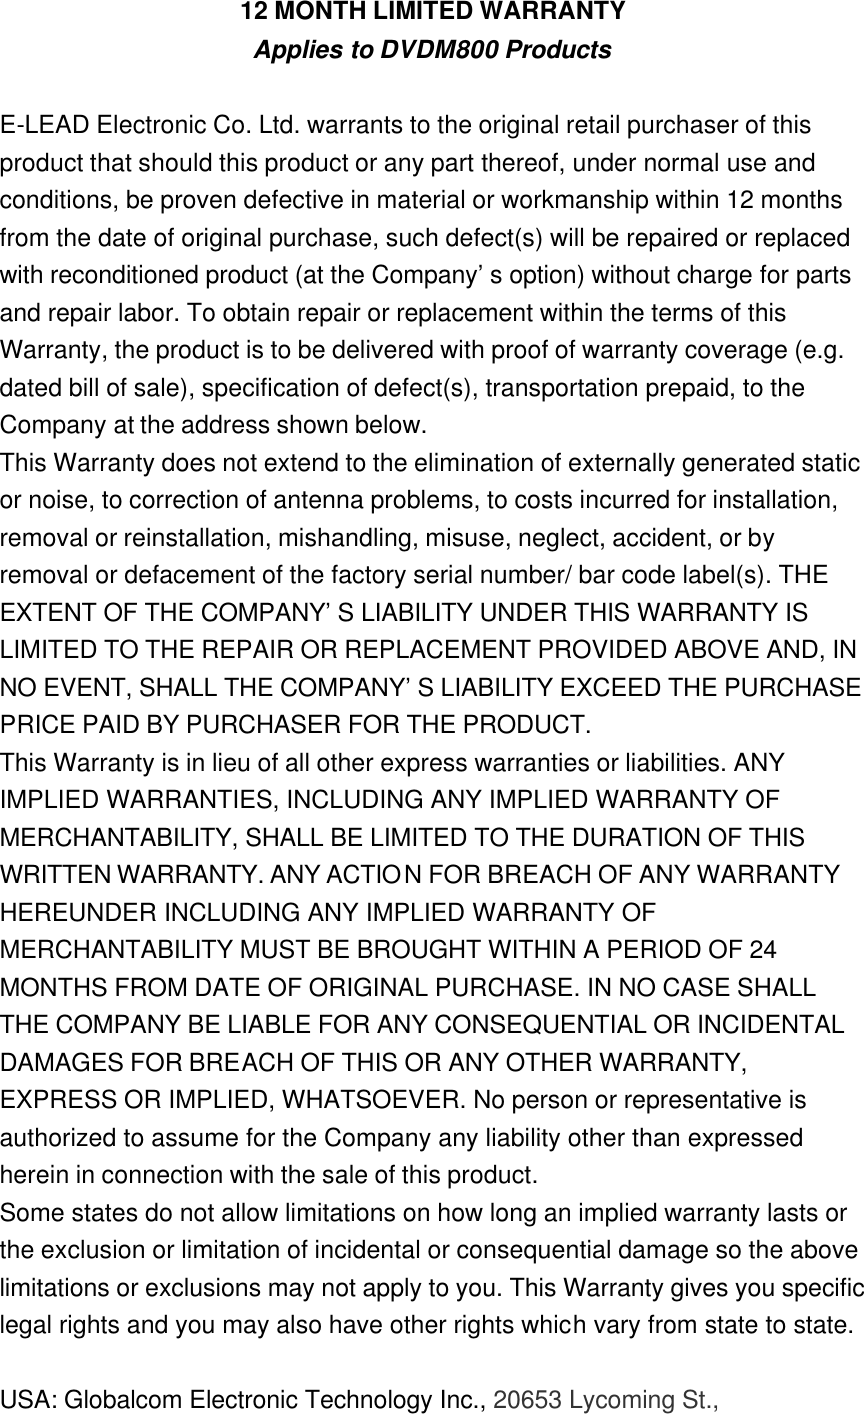 12 MONTH LIMITED WARRANTY Applies to DVDM800 Products  E-LEAD Electronic Co. Ltd. warrants to the original retail purchaser of this product that should this product or any part thereof, under normal use and conditions, be proven defective in material or workmanship within 12 months from the date of original purchase, such defect(s) will be repaired or replaced with reconditioned product (at the Company’s option) without charge for parts and repair labor. To obtain repair or replacement within the terms of this Warranty, the product is to be delivered with proof of warranty coverage (e.g. dated bill of sale), specification of defect(s), transportation prepaid, to the Company at the address shown below. This Warranty does not extend to the elimination of externally generated static or noise, to correction of antenna problems, to costs incurred for installation, removal or reinstallation, mishandling, misuse, neglect, accident, or by removal or defacement of the factory serial number/ bar code label(s). THE EXTENT OF THE COMPANY’S LIABILITY UNDER THIS WARRANTY IS LIMITED TO THE REPAIR OR REPLACEMENT PROVIDED ABOVE AND, IN NO EVENT, SHALL THE COMPANY’S LIABILITY EXCEED THE PURCHASE PRICE PAID BY PURCHASER FOR THE PRODUCT. This Warranty is in lieu of all other express warranties or liabilities. ANY IMPLIED WARRANTIES, INCLUDING ANY IMPLIED WARRANTY OF MERCHANTABILITY, SHALL BE LIMITED TO THE DURATION OF THIS WRITTEN WARRANTY. ANY ACTION FOR BREACH OF ANY WARRANTY HEREUNDER INCLUDING ANY IMPLIED WARRANTY OF MERCHANTABILITY MUST BE BROUGHT WITHIN A PERIOD OF 24 MONTHS FROM DATE OF ORIGINAL PURCHASE. IN NO CASE SHALL THE COMPANY BE LIABLE FOR ANY CONSEQUENTIAL OR INCIDENTAL DAMAGES FOR BREACH OF THIS OR ANY OTHER WARRANTY, EXPRESS OR IMPLIED, WHATSOEVER. No person or representative is authorized to assume for the Company any liability other than expressed herein in connection with the sale of this product. Some states do not allow limitations on how long an implied warranty lasts or the exclusion or limitation of incidental or consequential damage so the above limitations or exclusions may not apply to you. This Warranty gives you specific legal rights and you may also have other rights which vary from state to state.  USA: Globalcom Electronic Technology Inc., 20653 Lycoming St., 